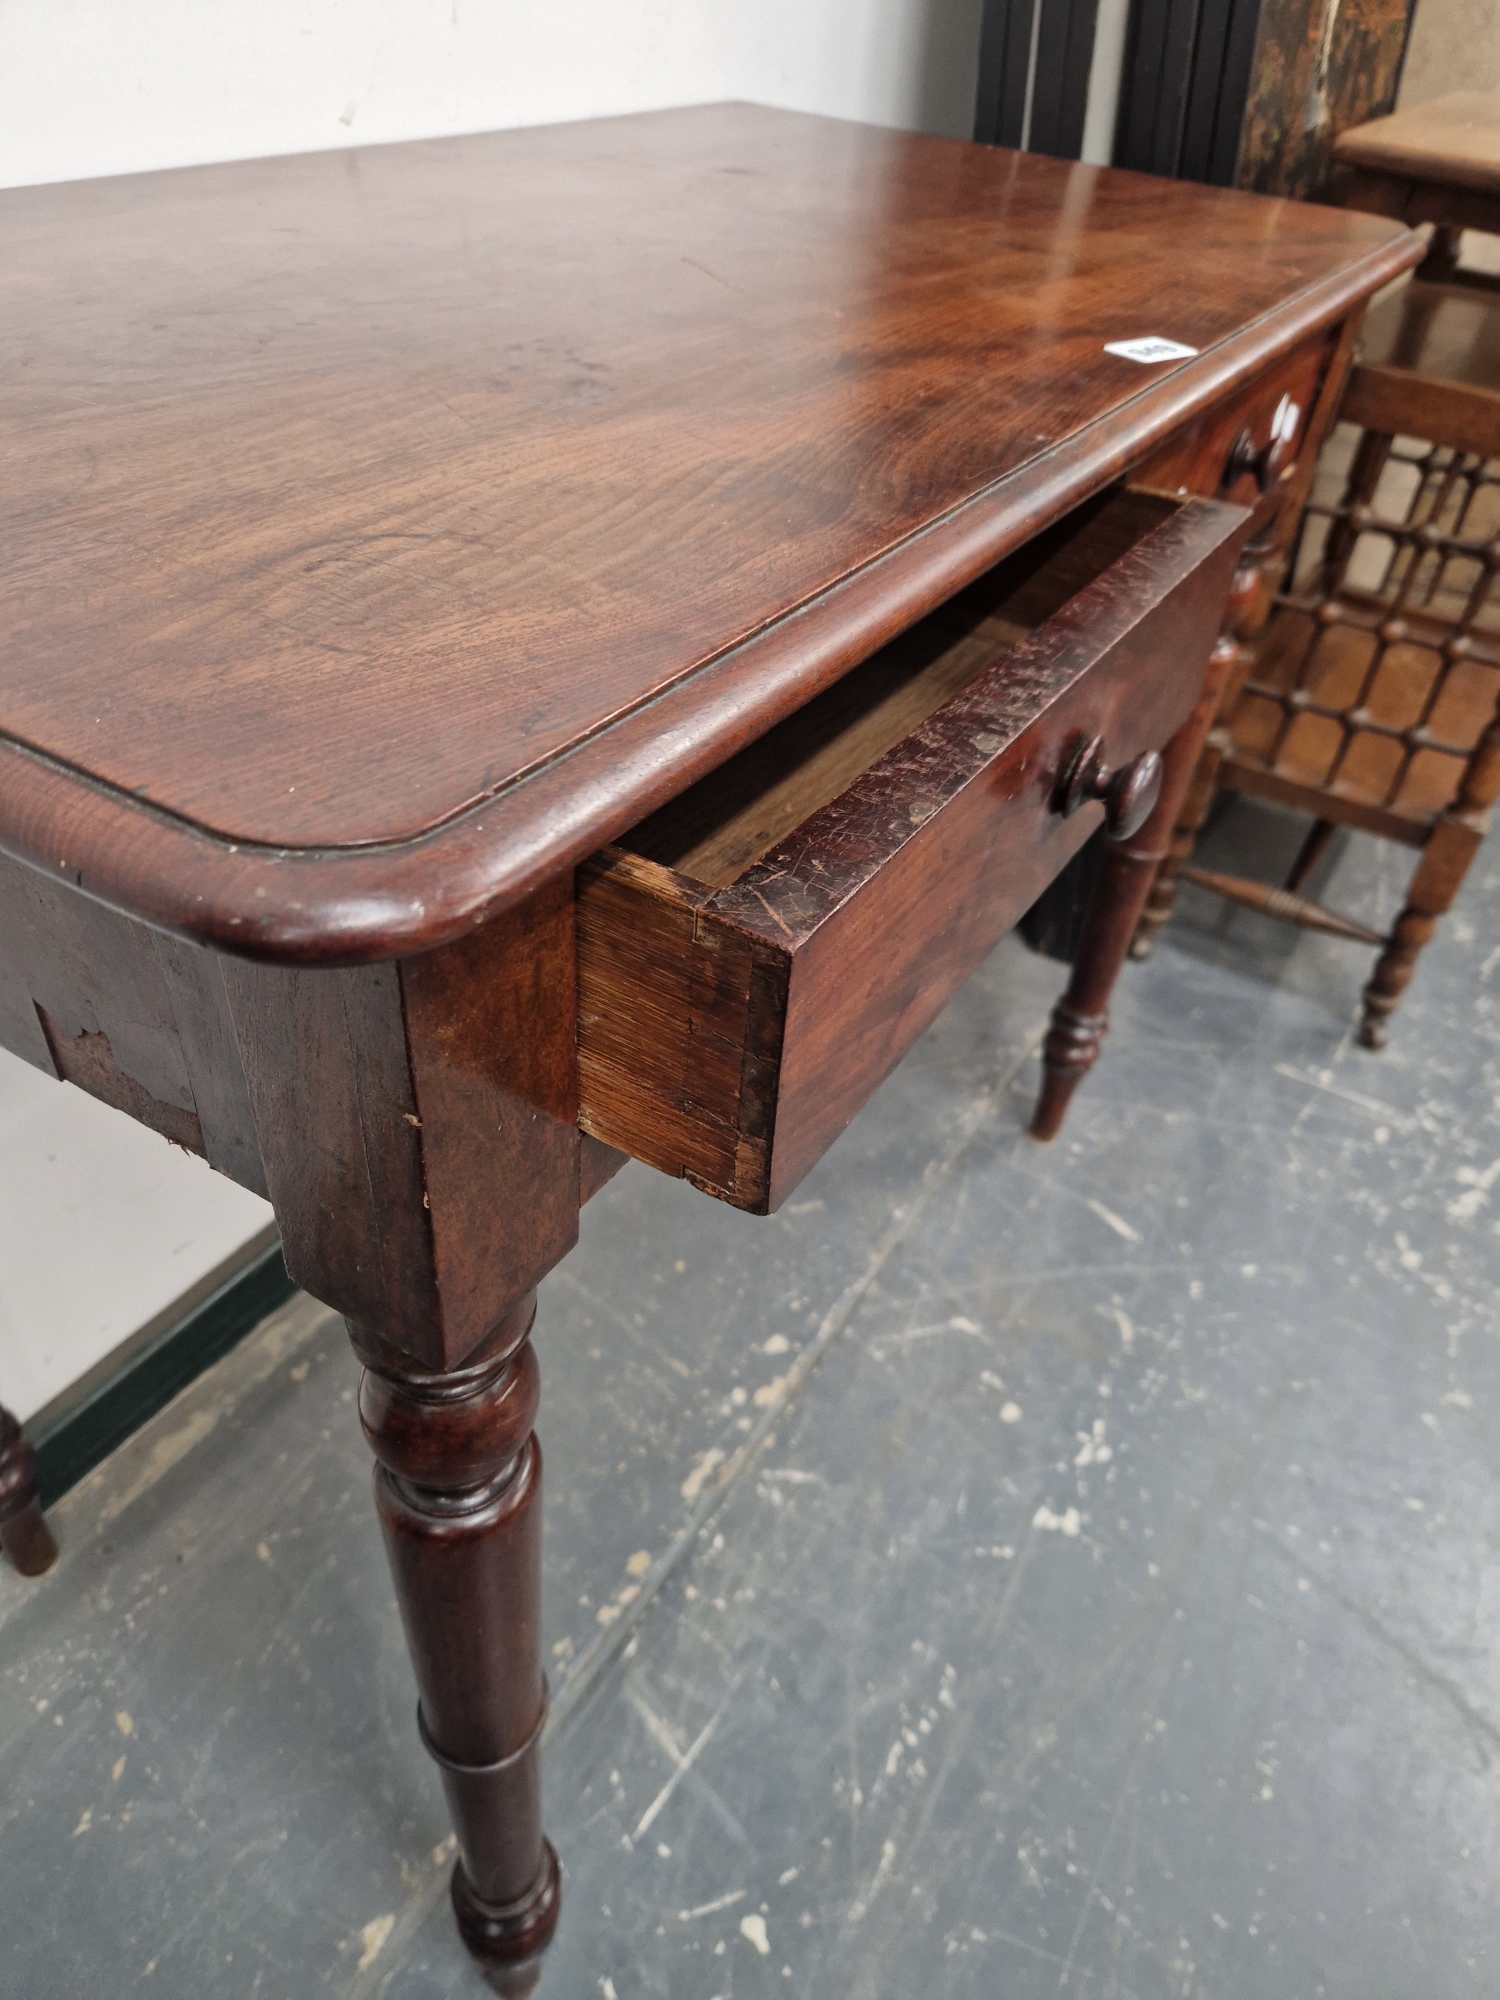 A 19th C. MAHOGANY TWO DRAWER TABLE WITH A RECTANGULAR TOP ON TURNED CYLINDRICAL LEGS WITH SPINDLE - Image 4 of 4